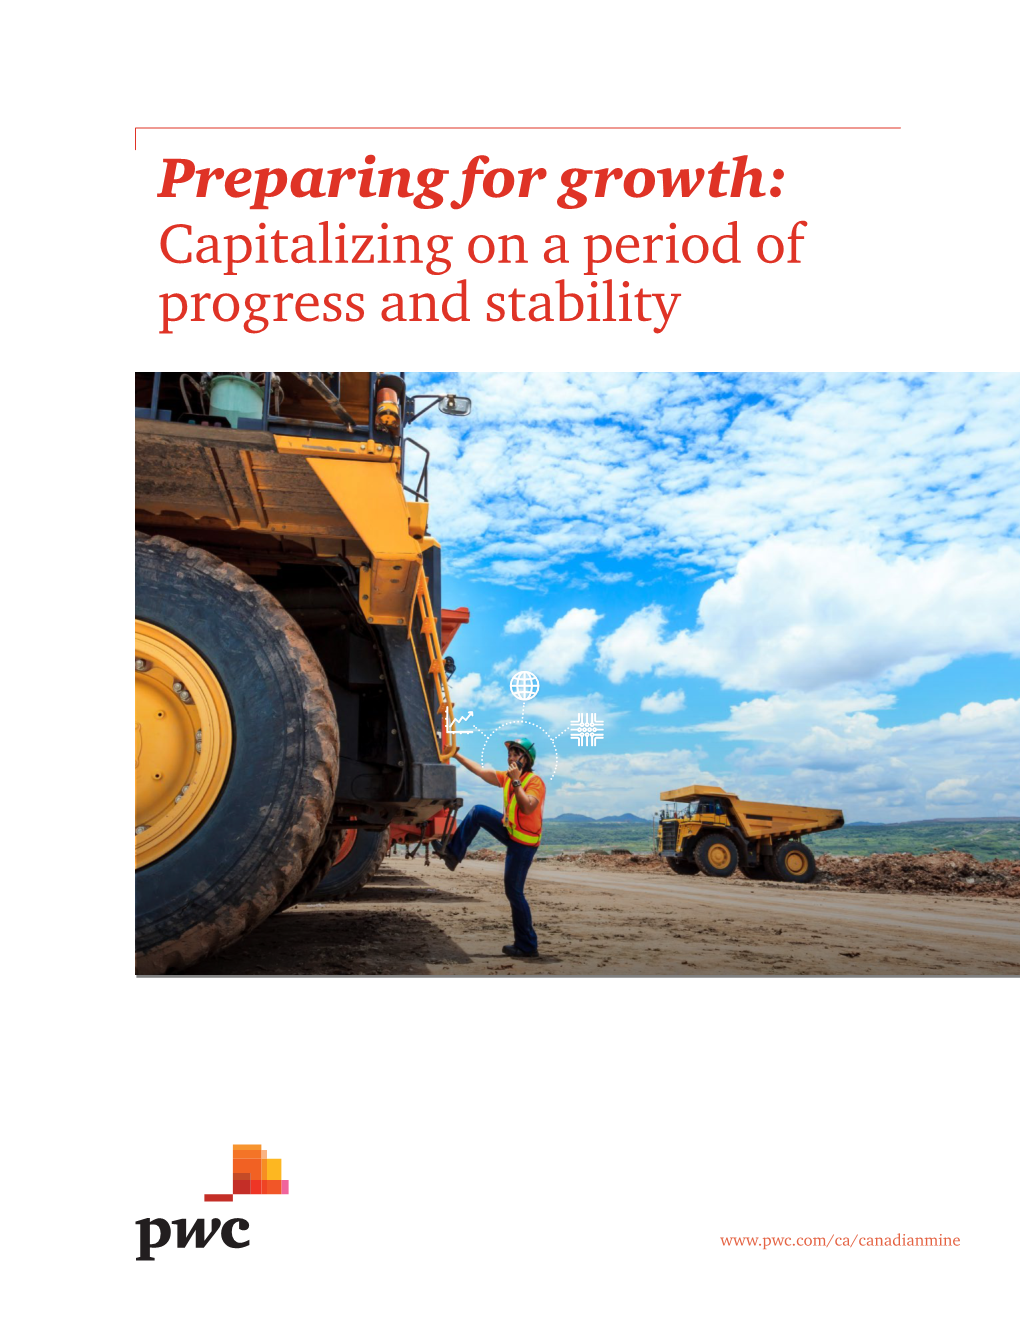 Preparing for Growth: Capitalizing on a Period of Progress and Stability